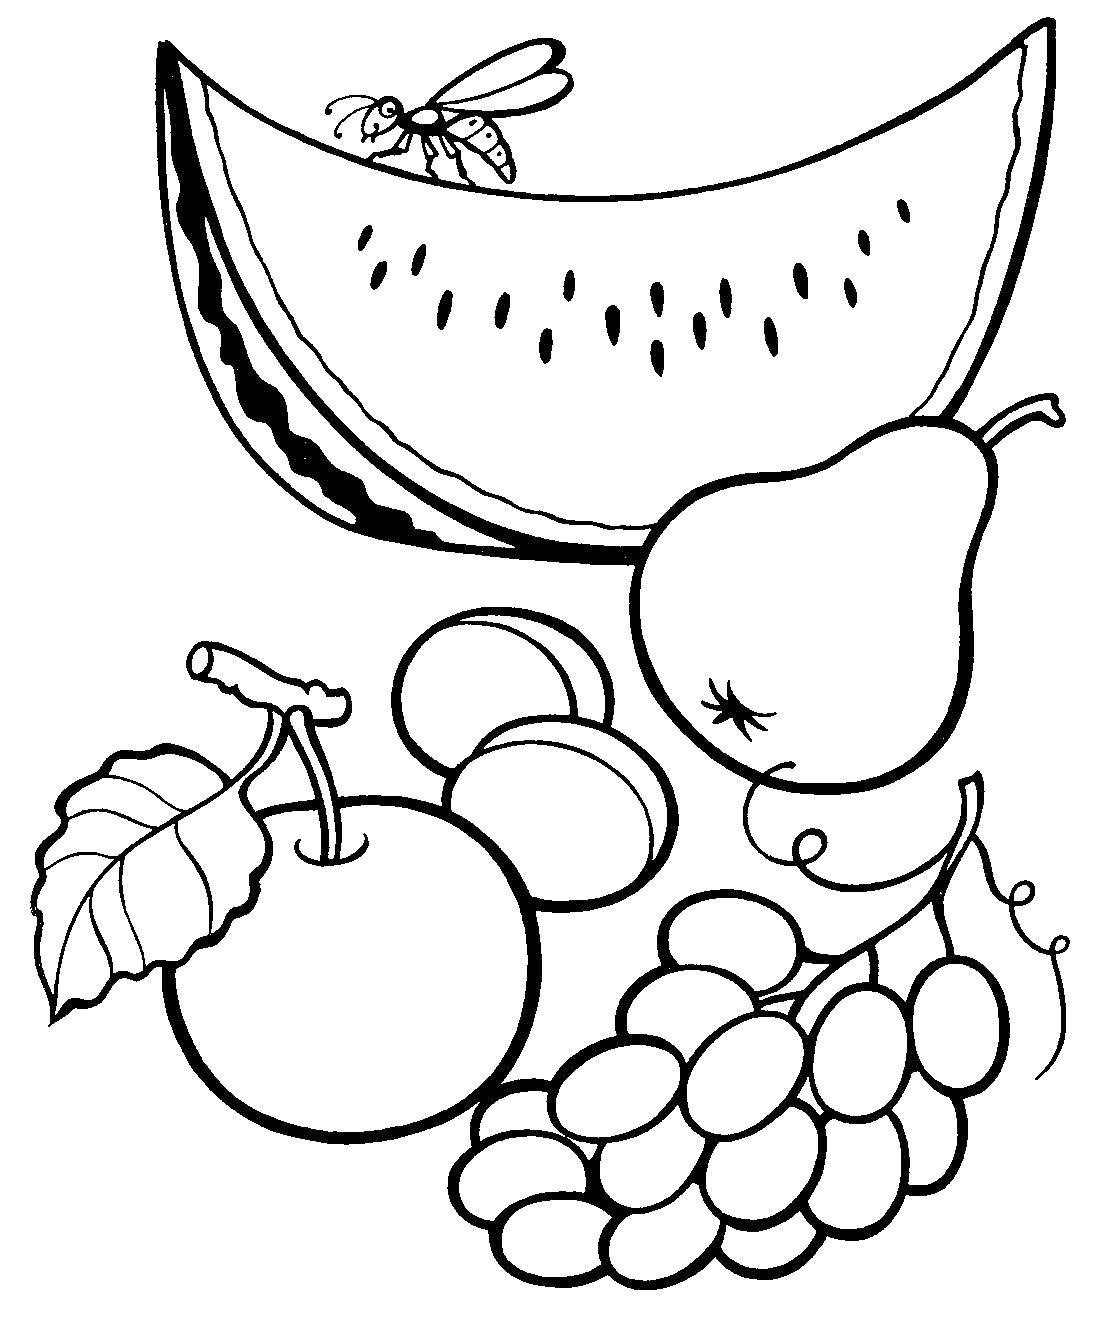 Coloring Fruits and berries. Category the food. Tags:  fruit, berries, summer.